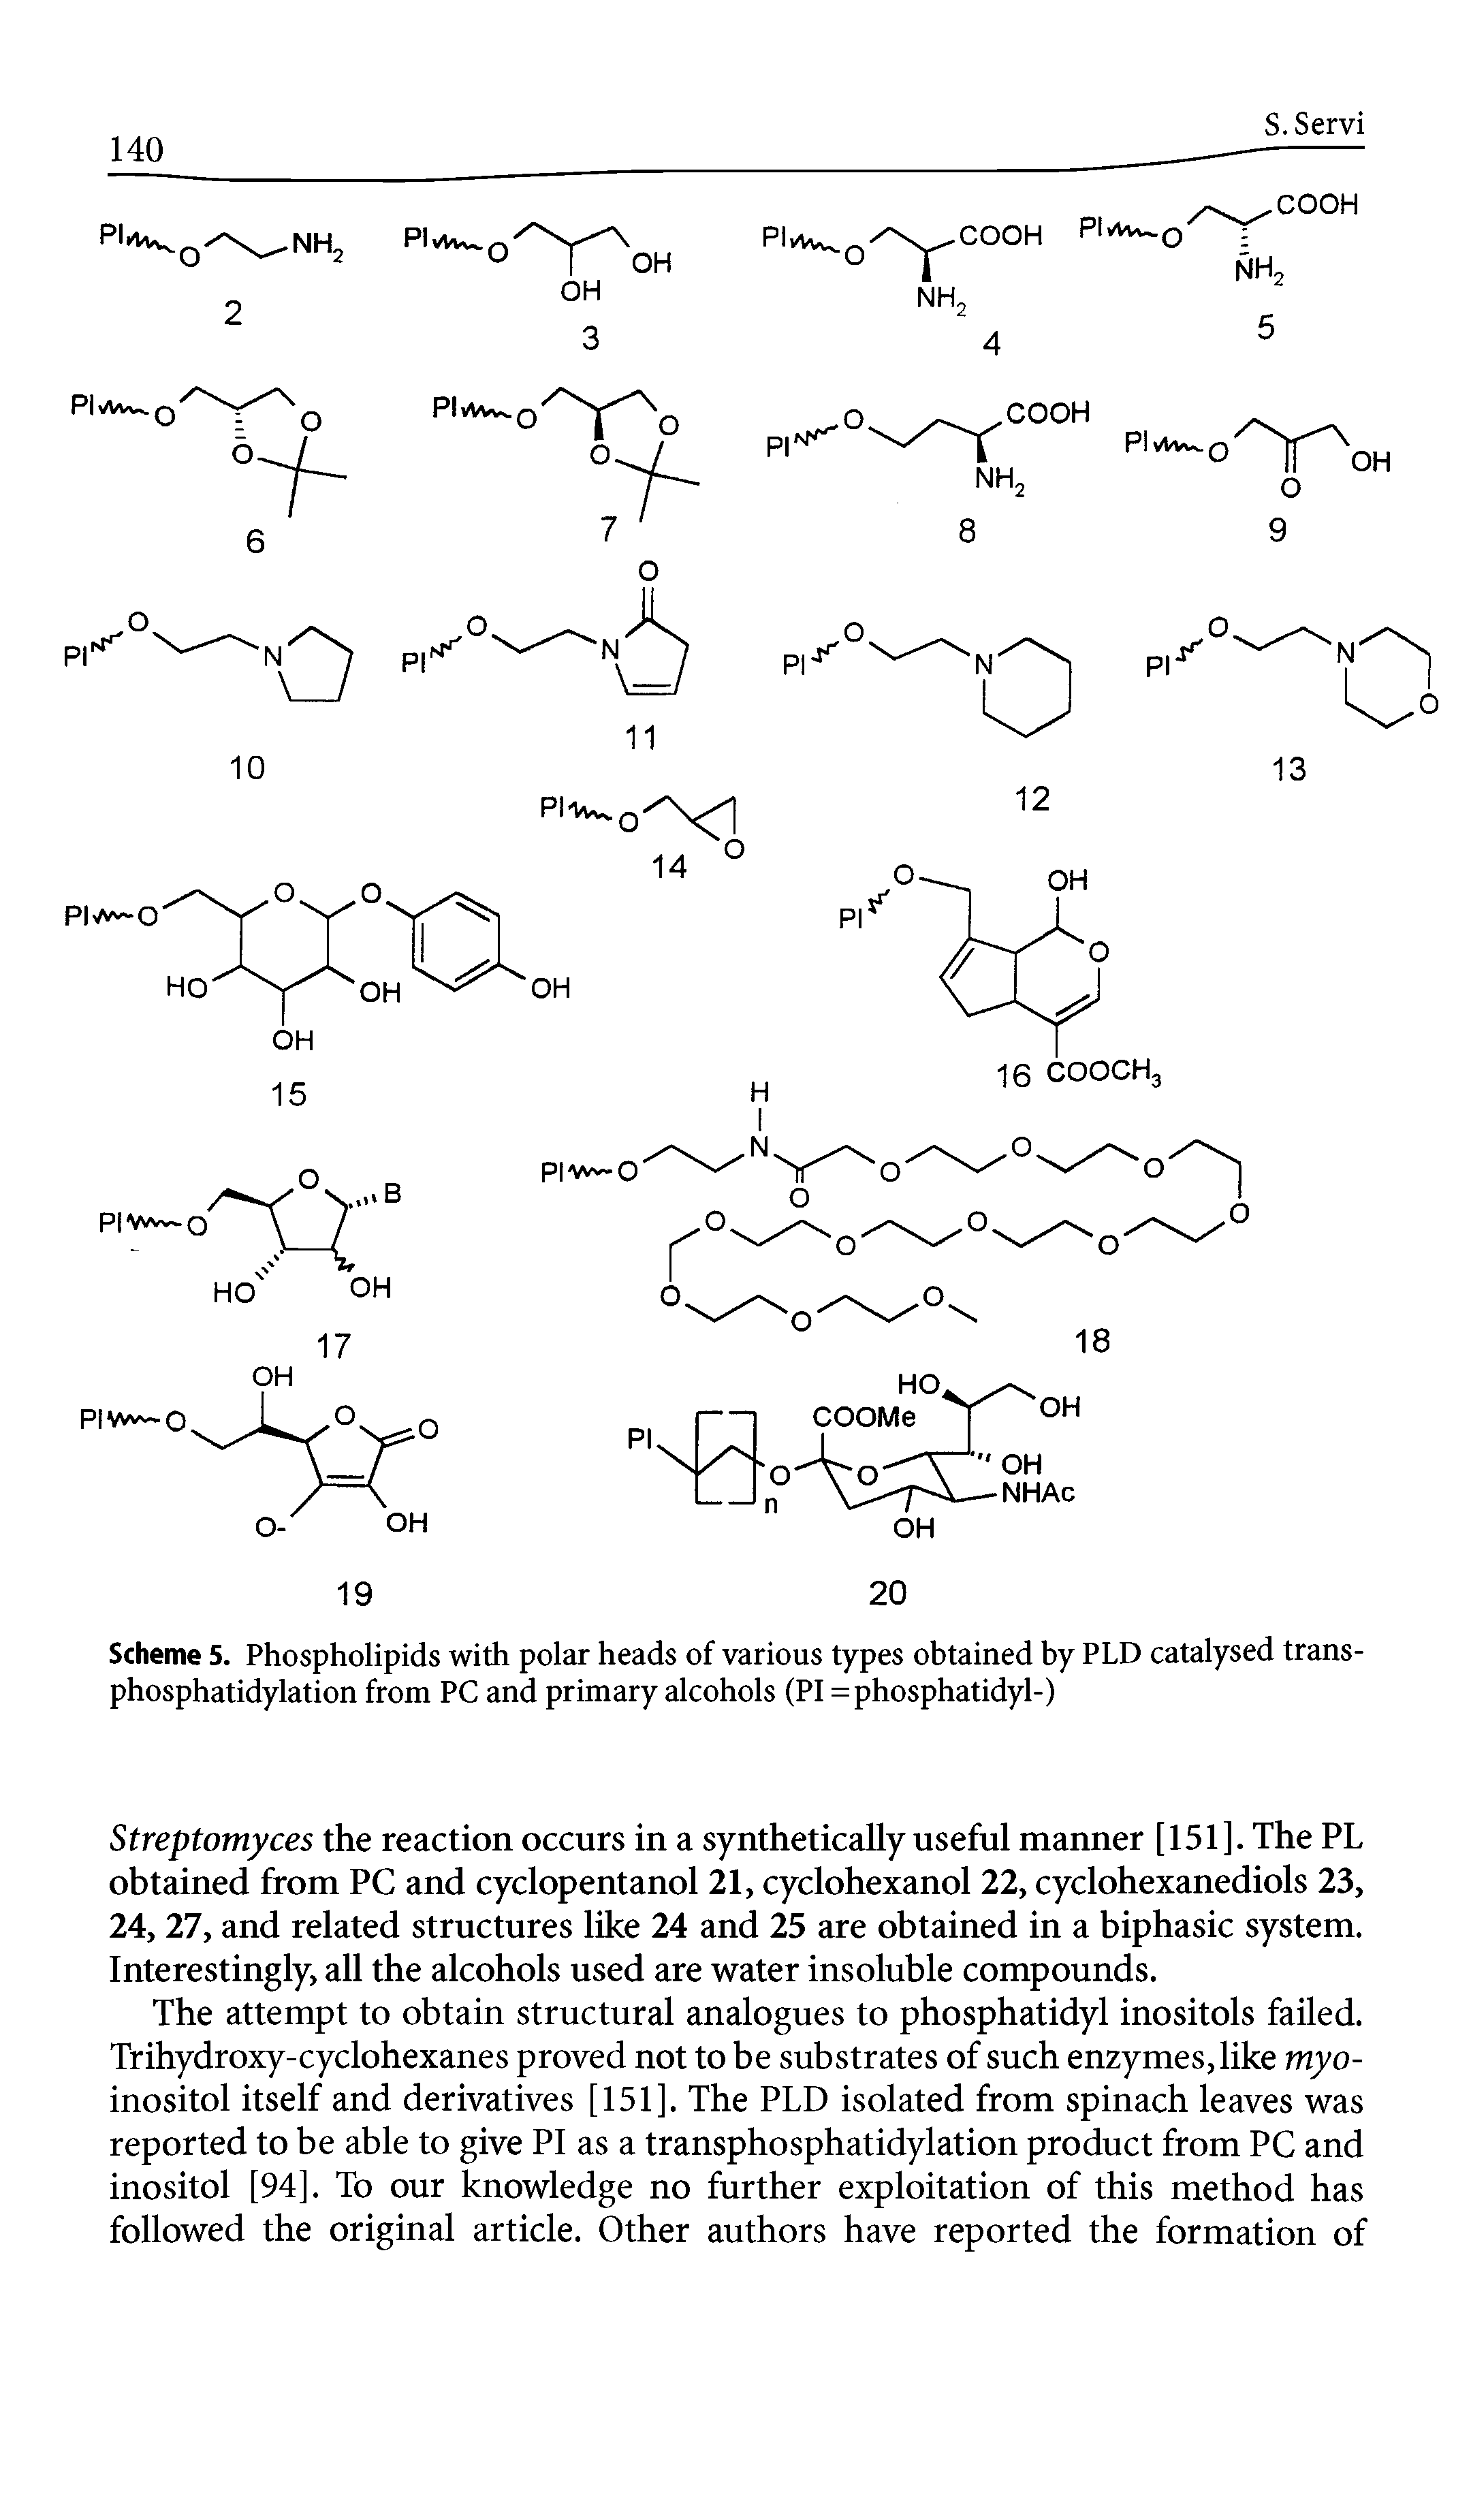 Scheme 5. Phospholipids with polar heads of various types obtained by PLD catalysed transphosphatidylation from PC and primary alcohols (PI = phosphatidyl-)...